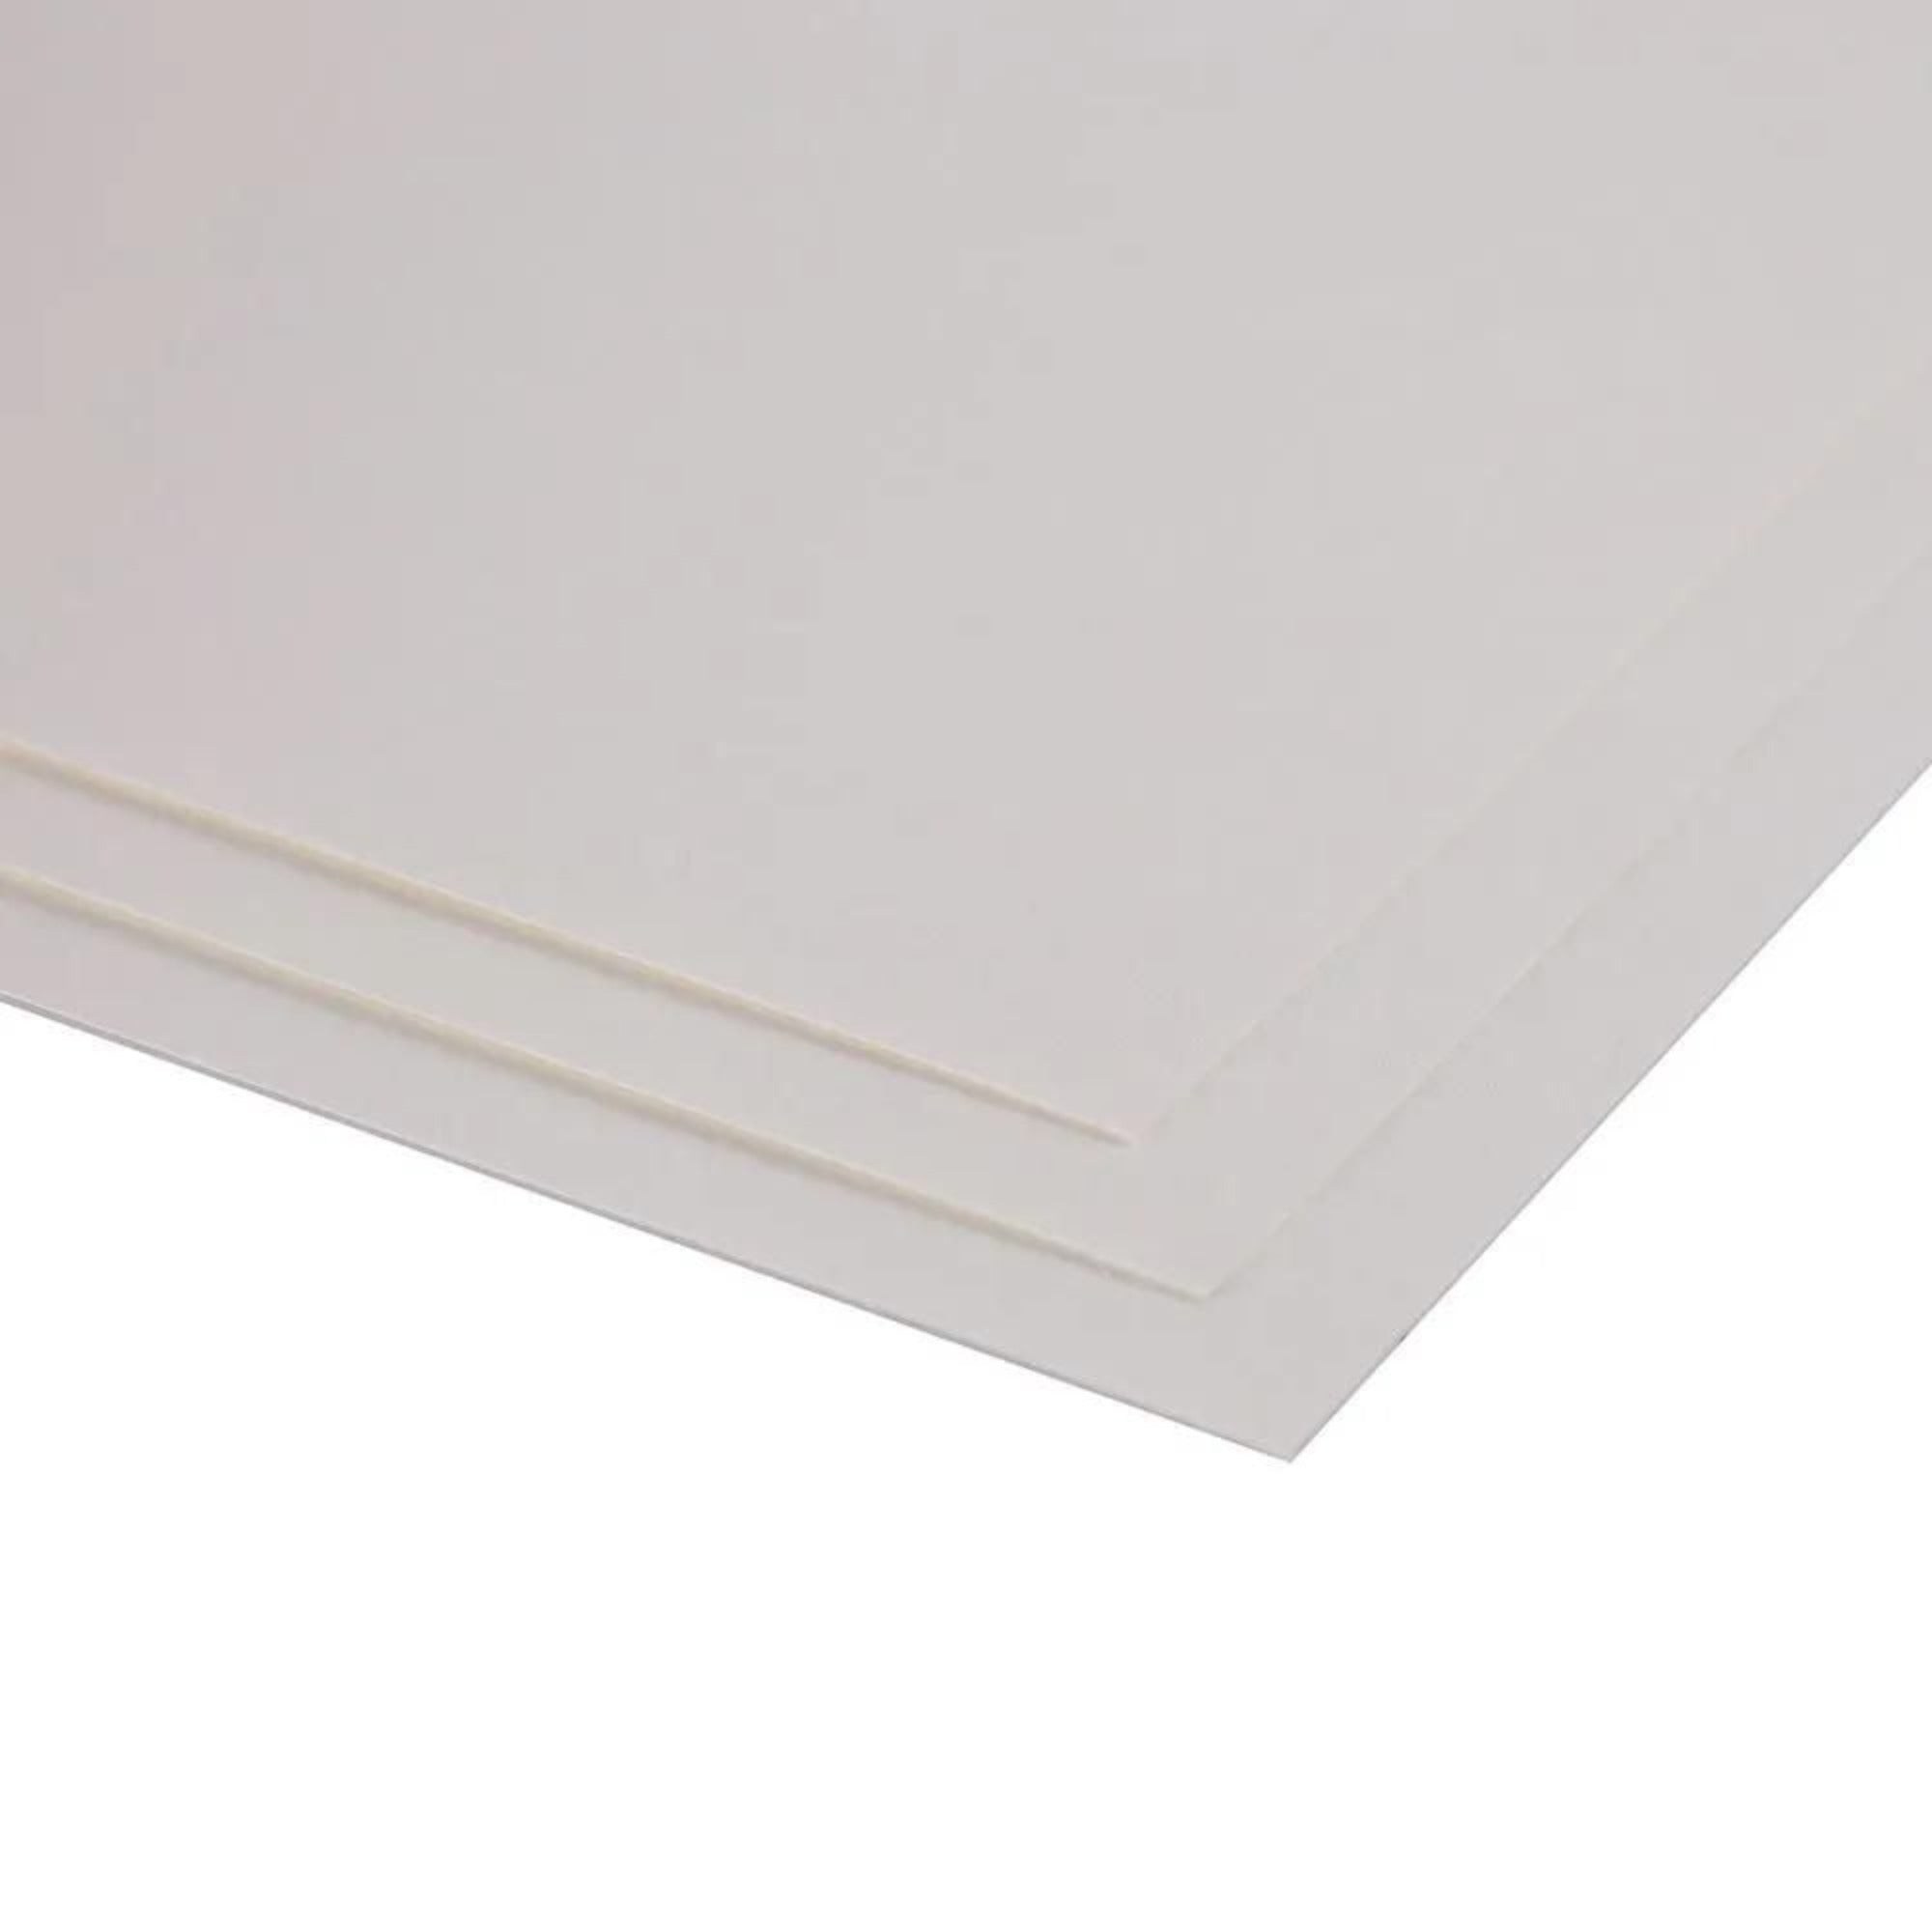 Seawhite - A3+ Acrylic Painting Paper - 360gsm - 20 sheet pack